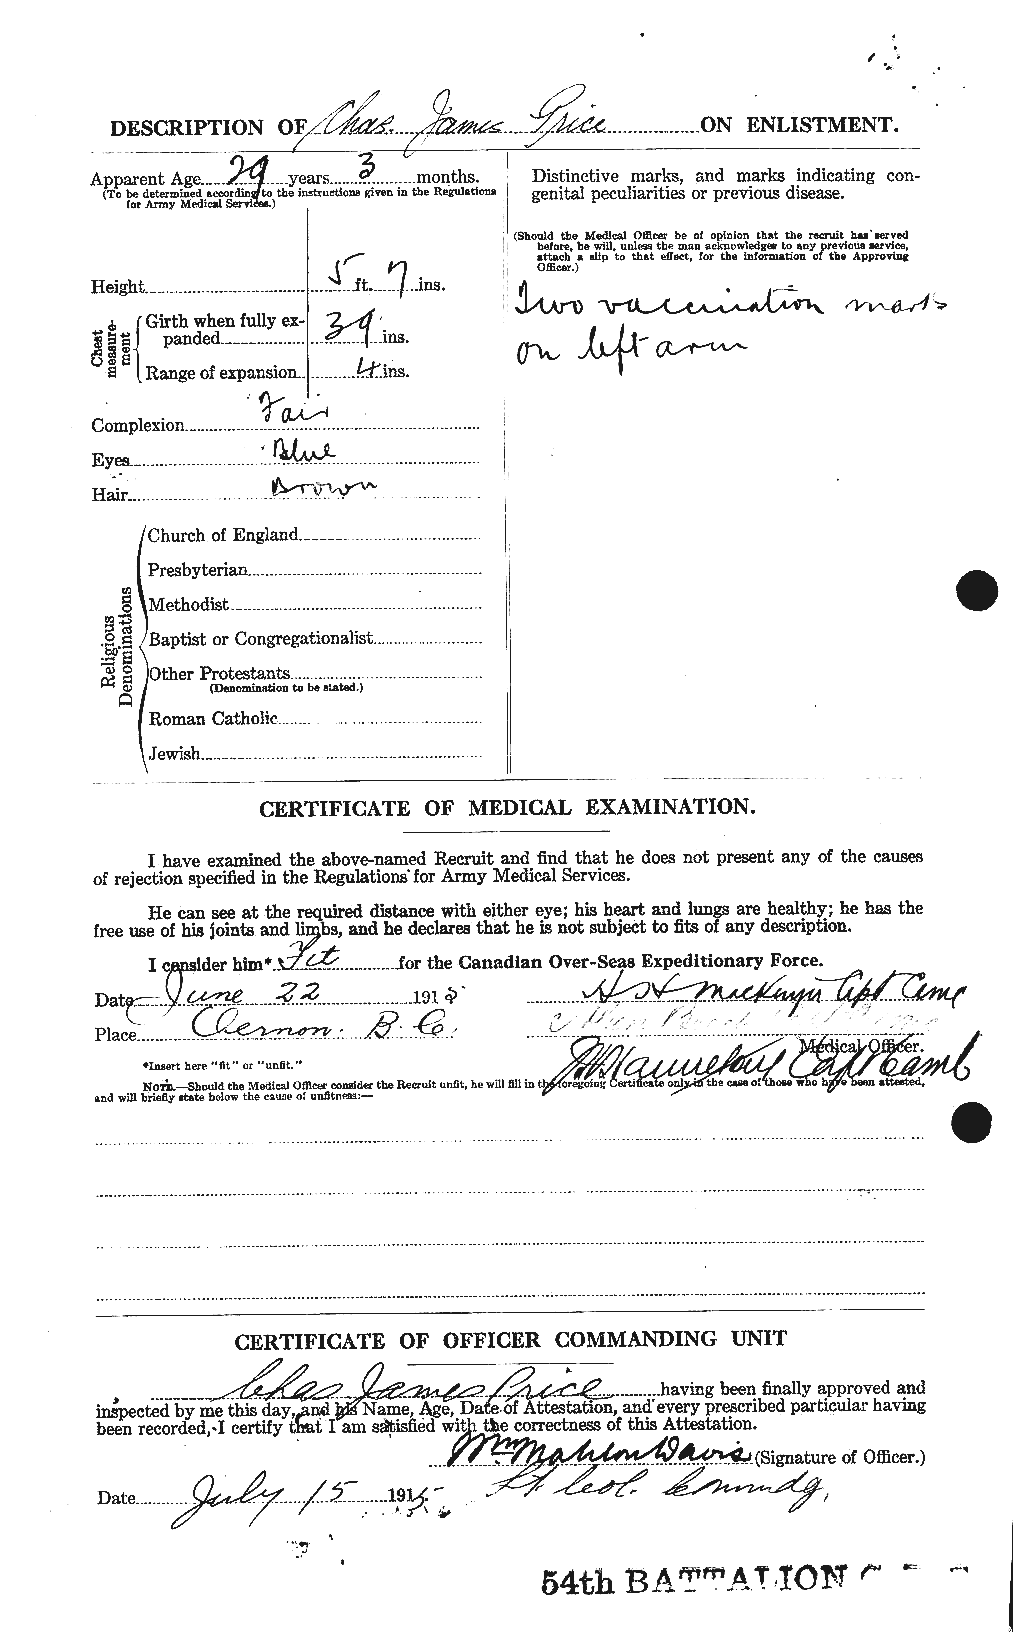 Personnel Records of the First World War - CEF 586982b